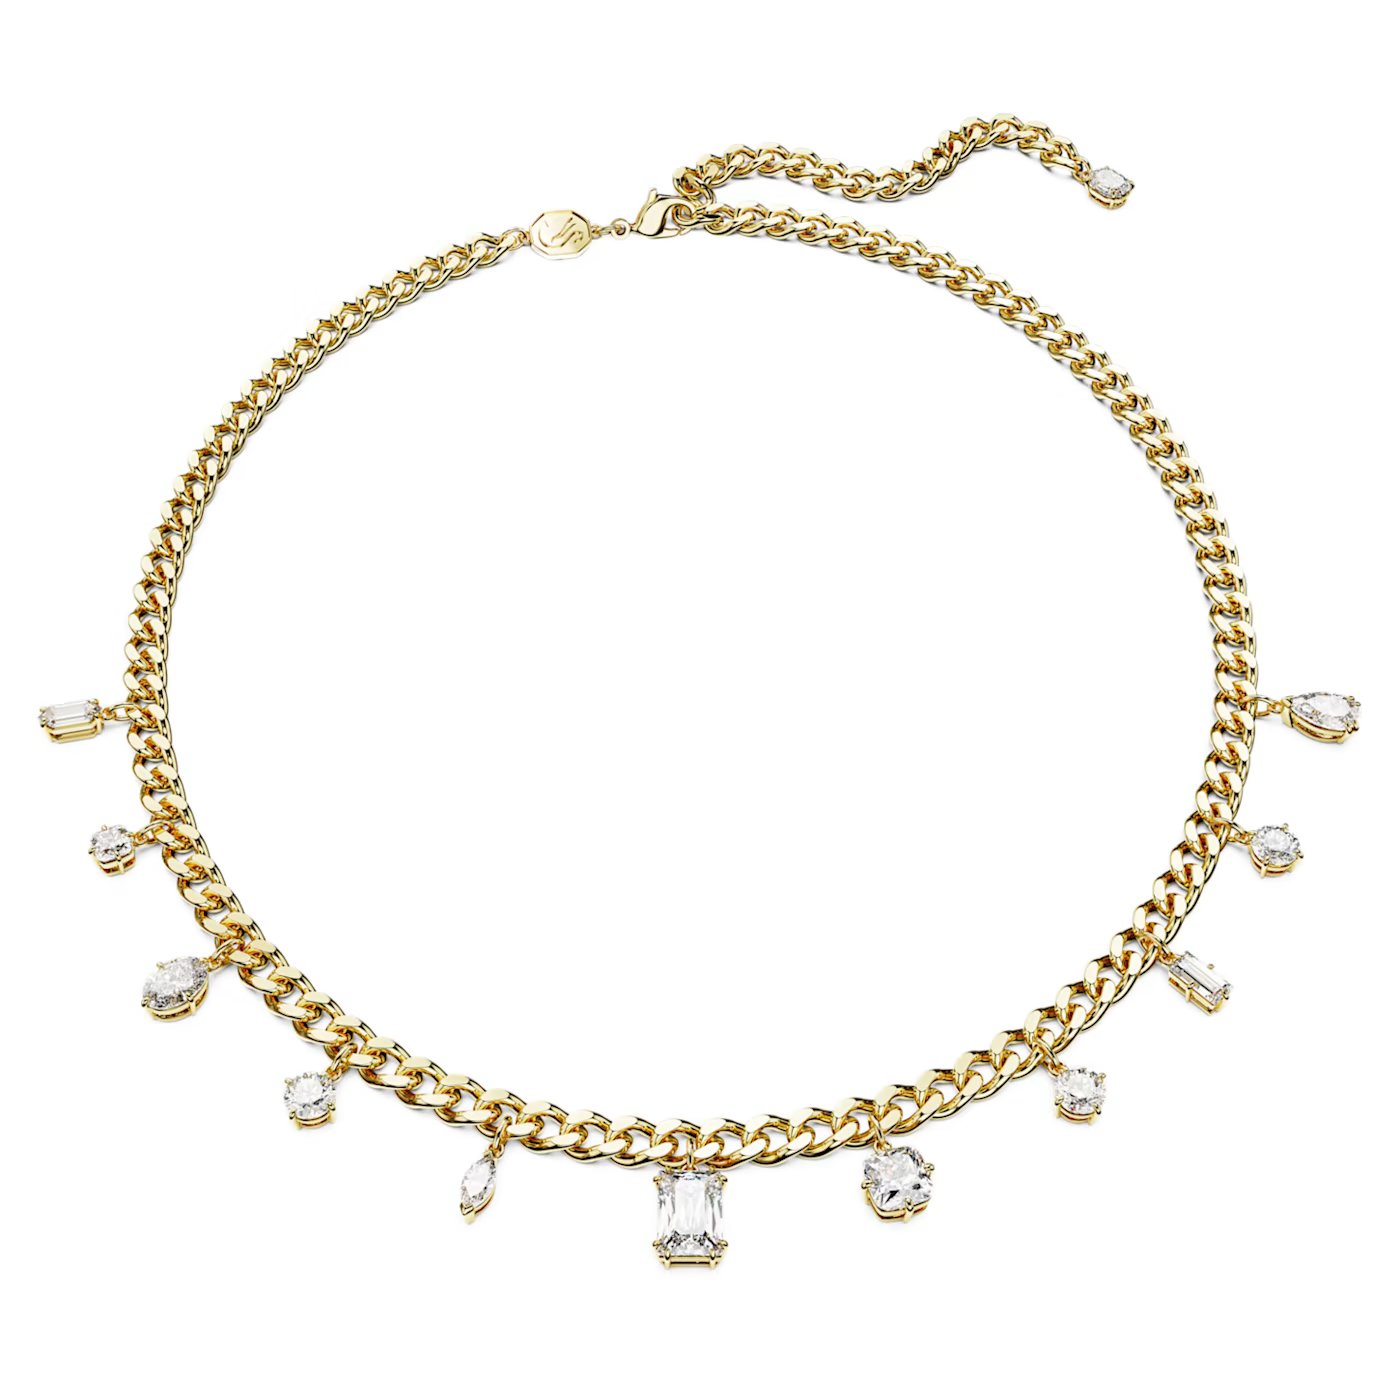 64aedf807d169_dextera-necklace--mixed-cuts--white--gold-tone-plated-swarovski-5663338.jpg